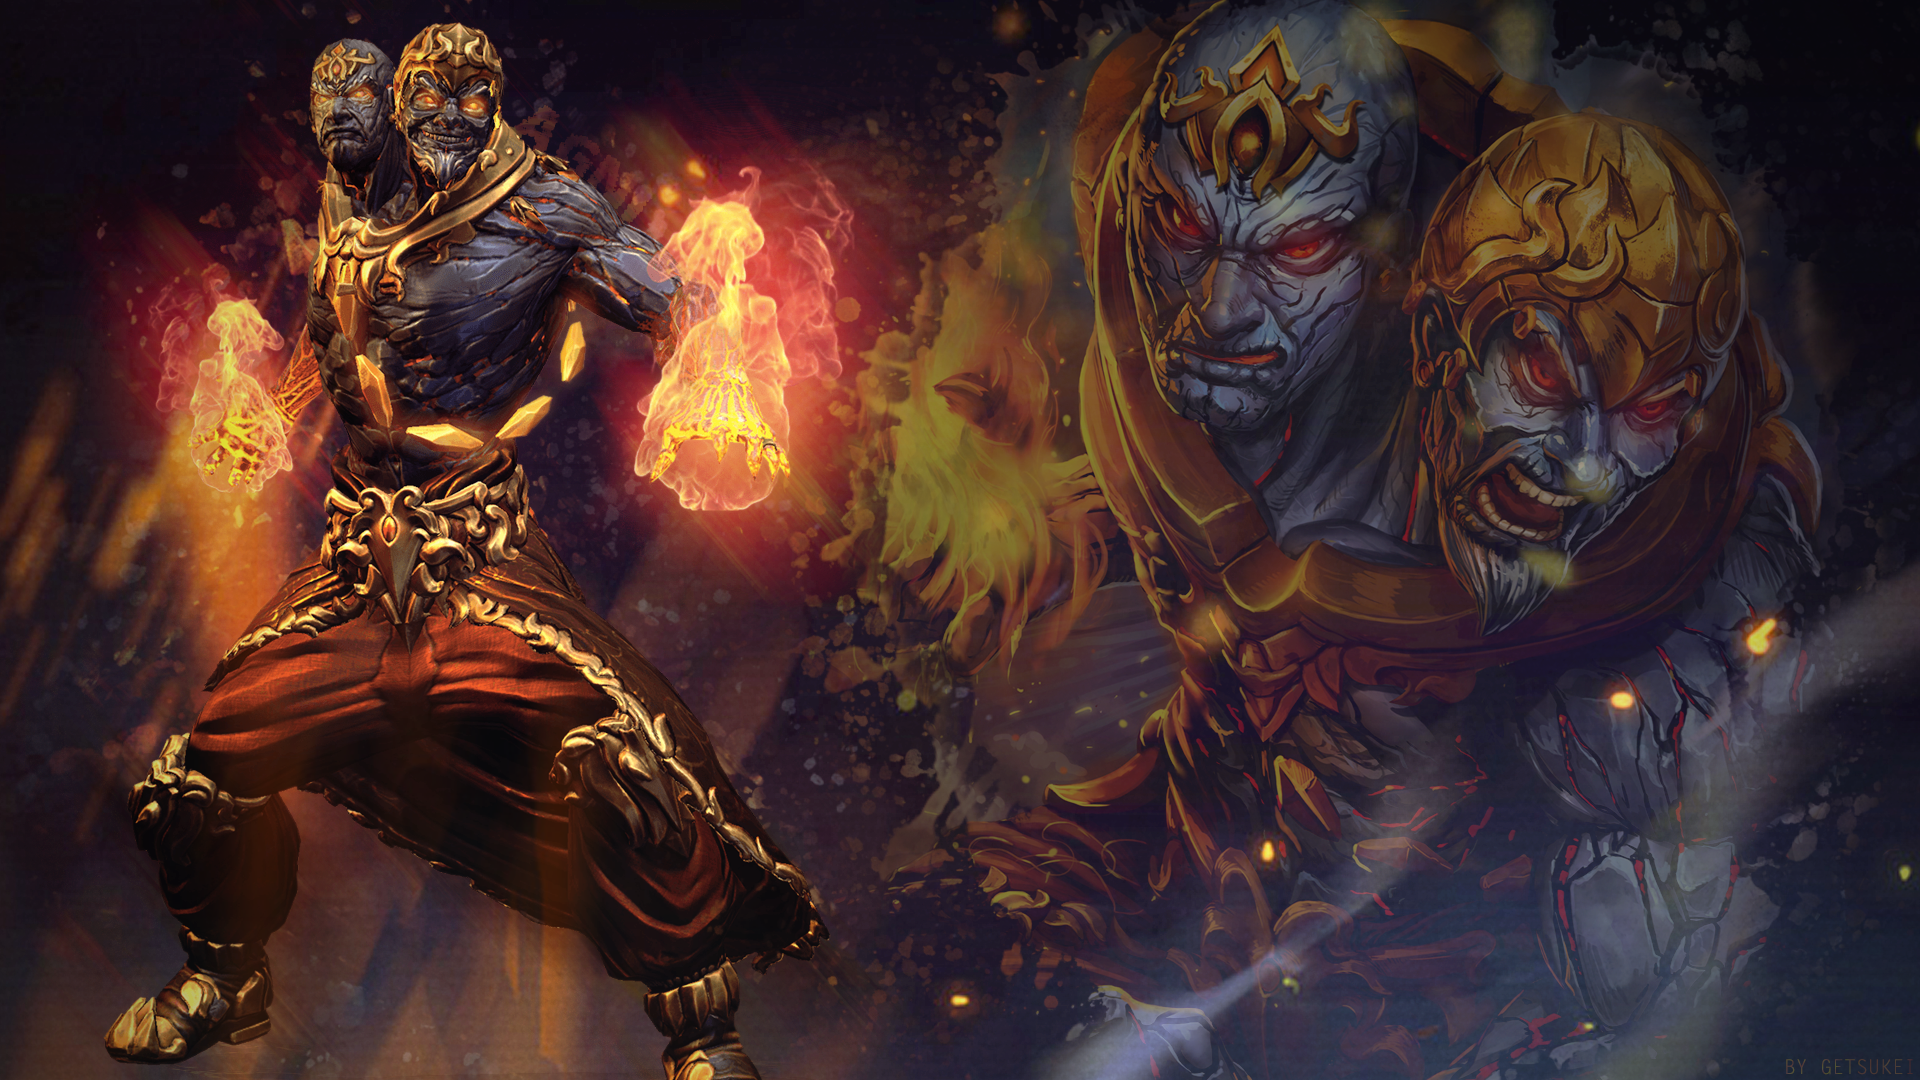 SMITE - Agni, God of Fire (Wallpaper) by Getsukeii on ...